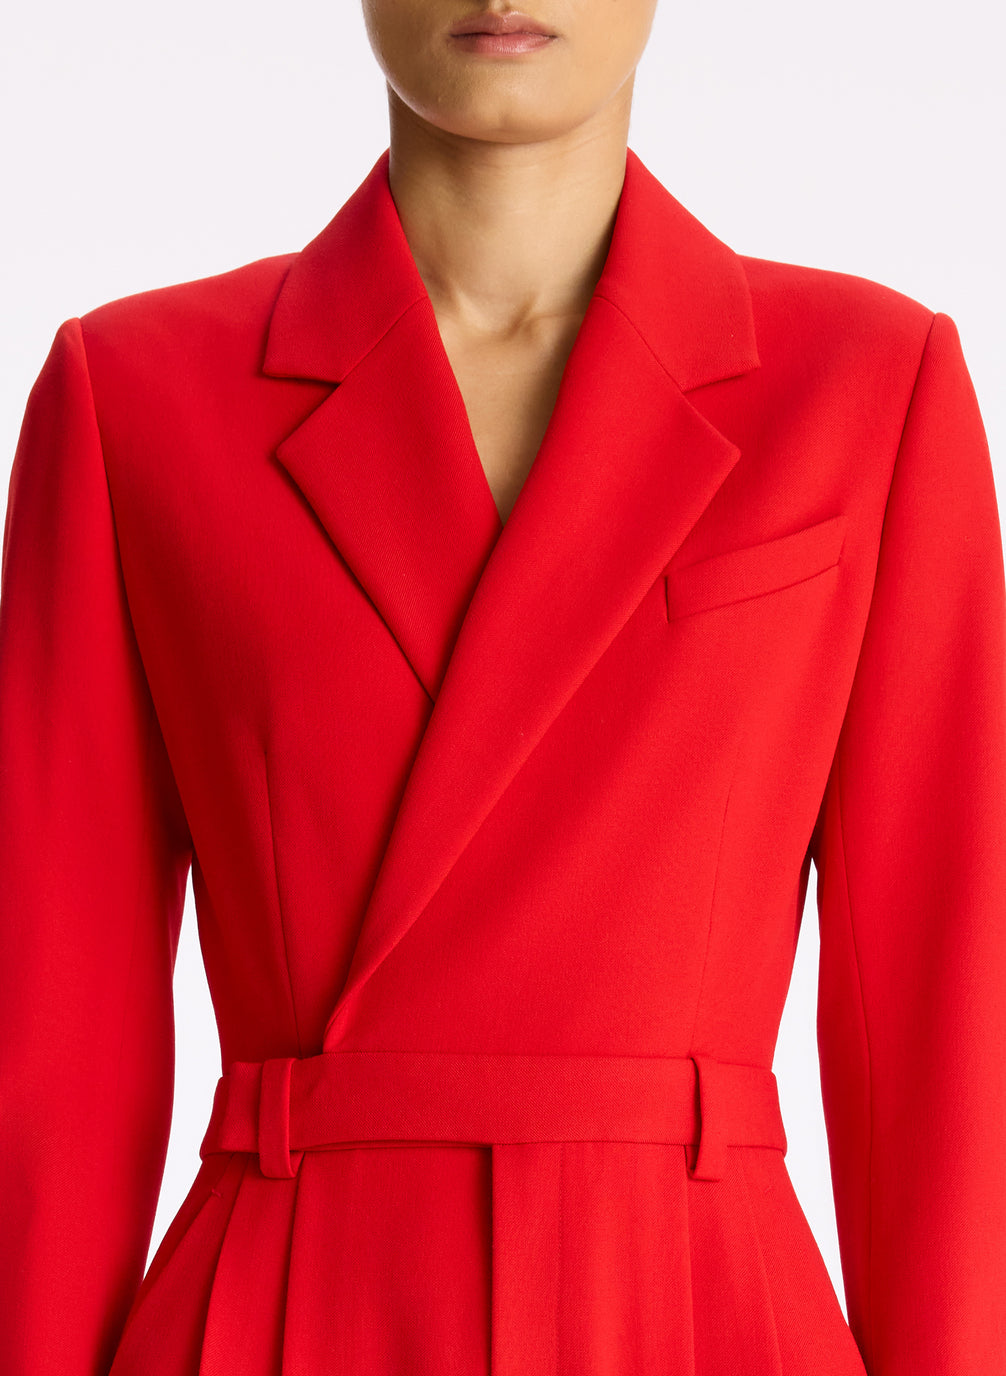 detail view of woman wearing red long sleeve jumpsuit with back cutout